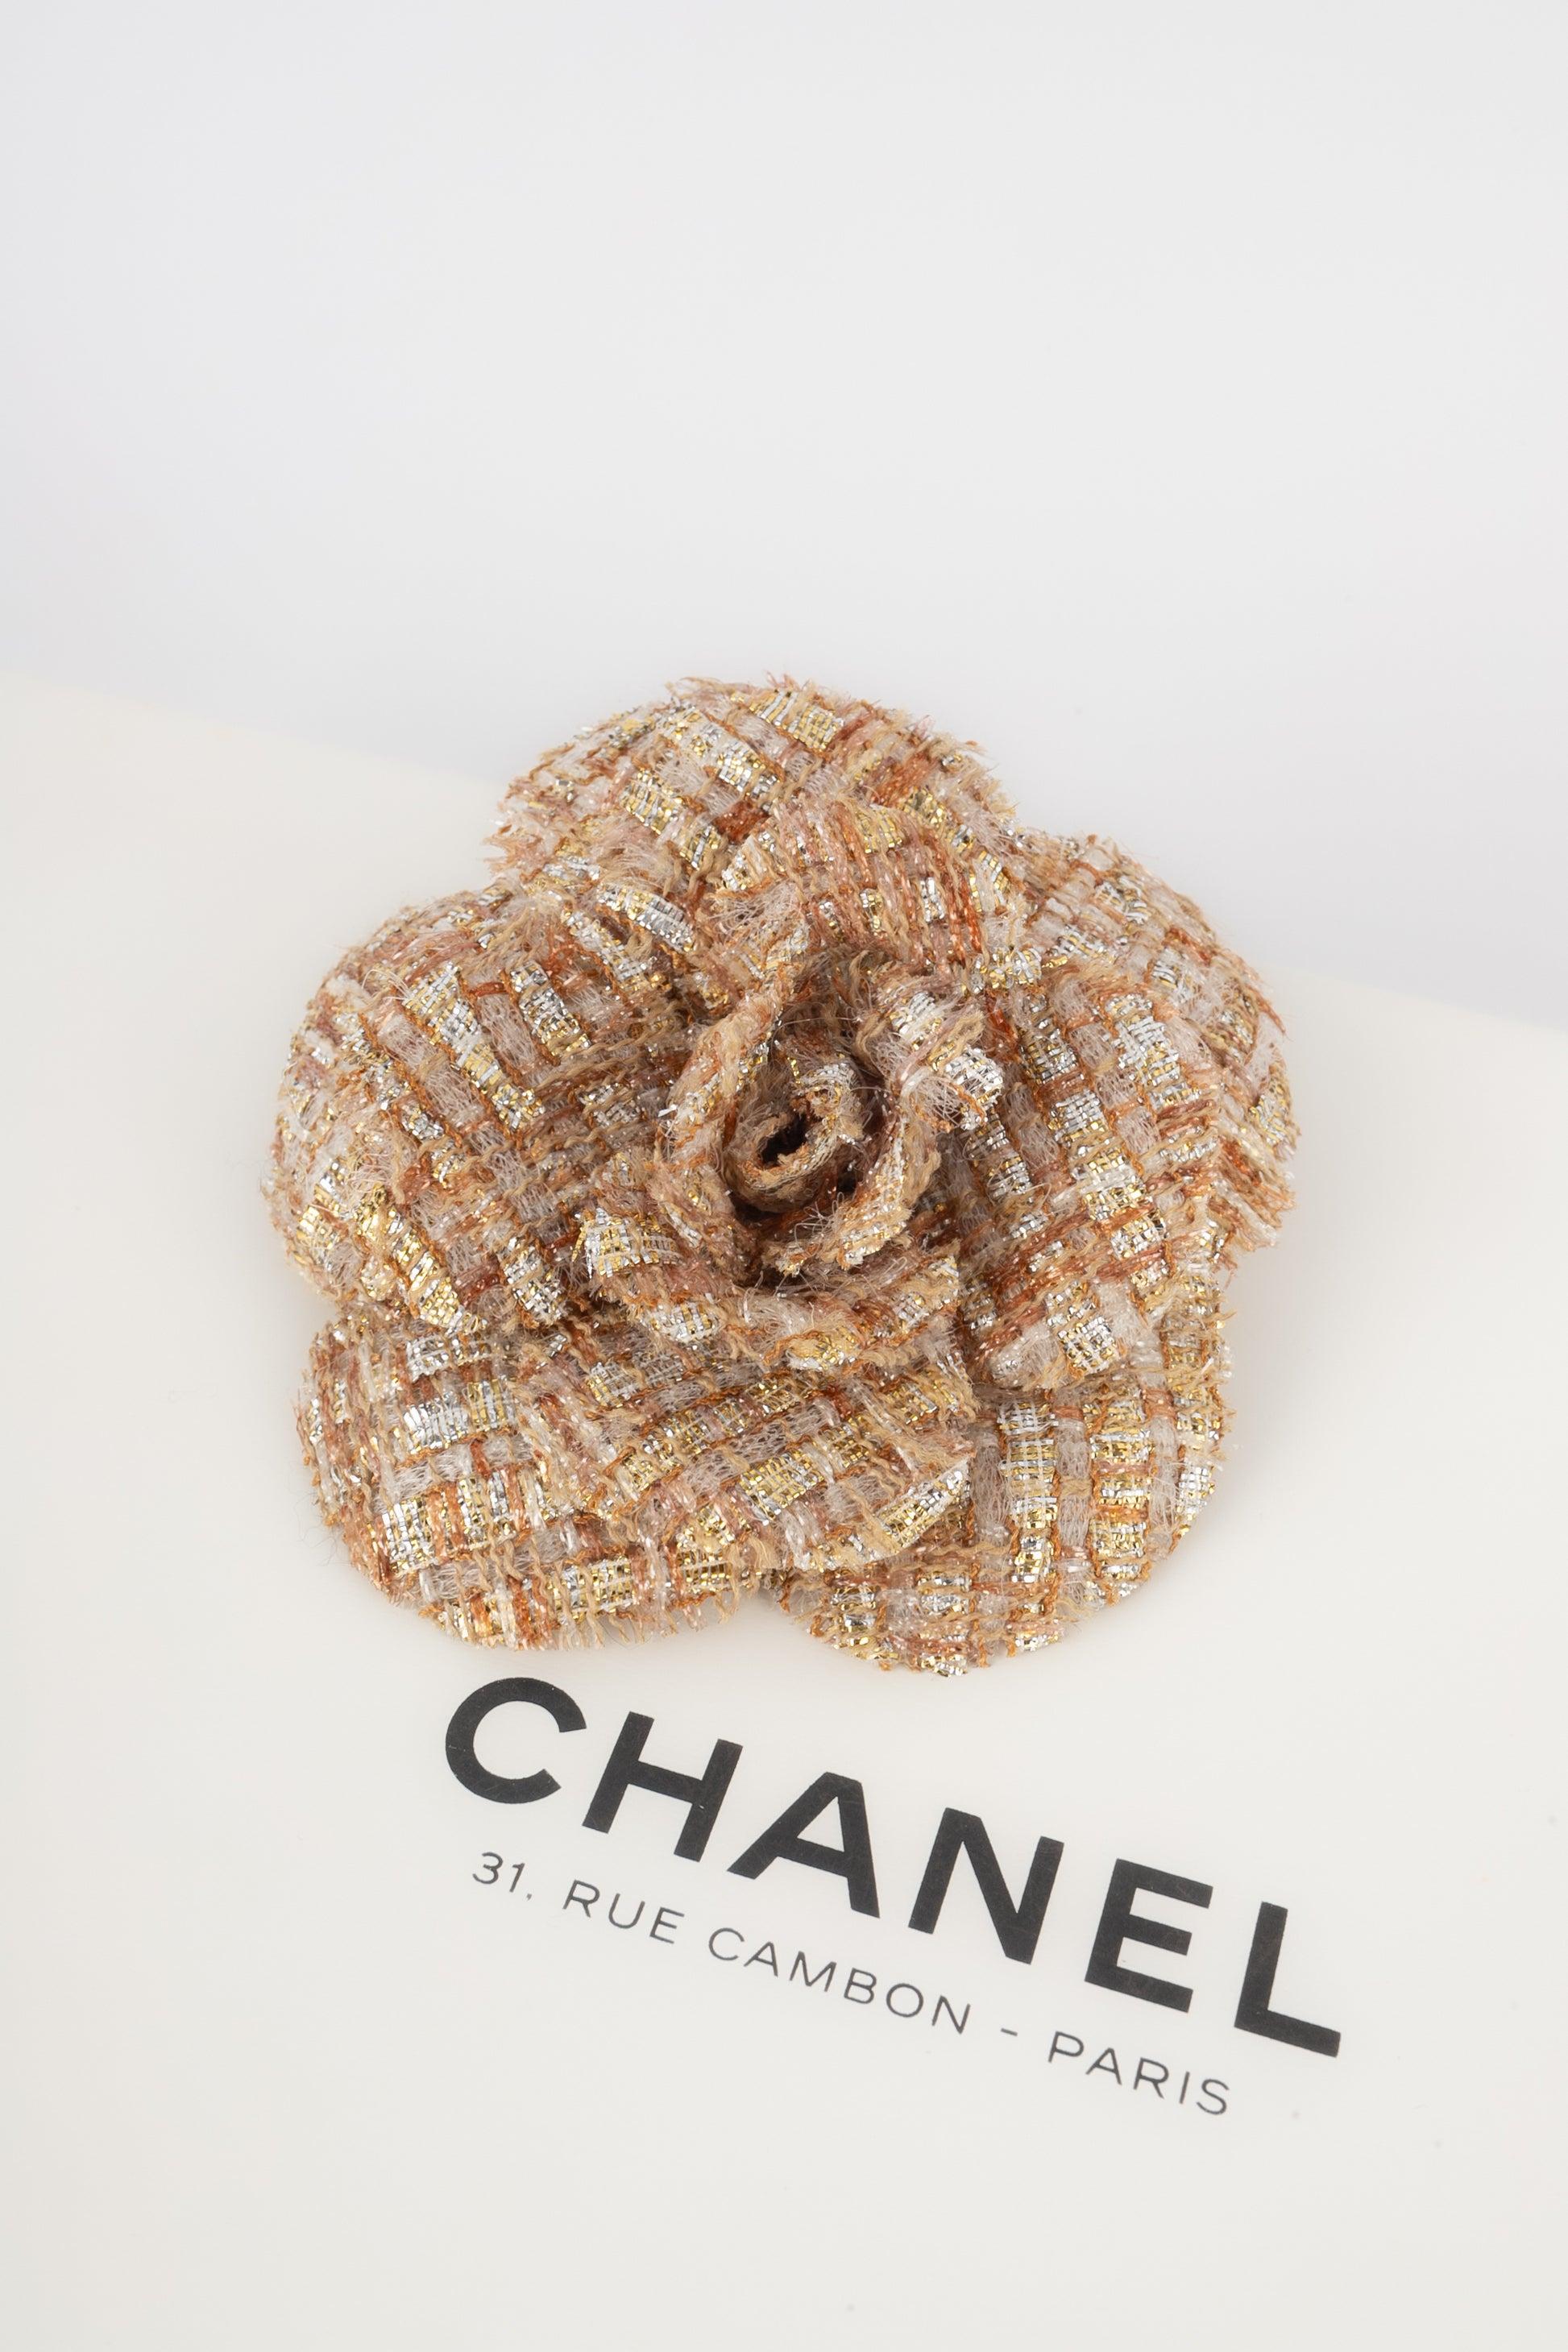 Chanel - (Made in France) Tweed camellia brooch.
 
 Additional information: 
 Condition: Very good condition
 Dimensions: Height: 9 cm
 
 Seller Reference: BRB164